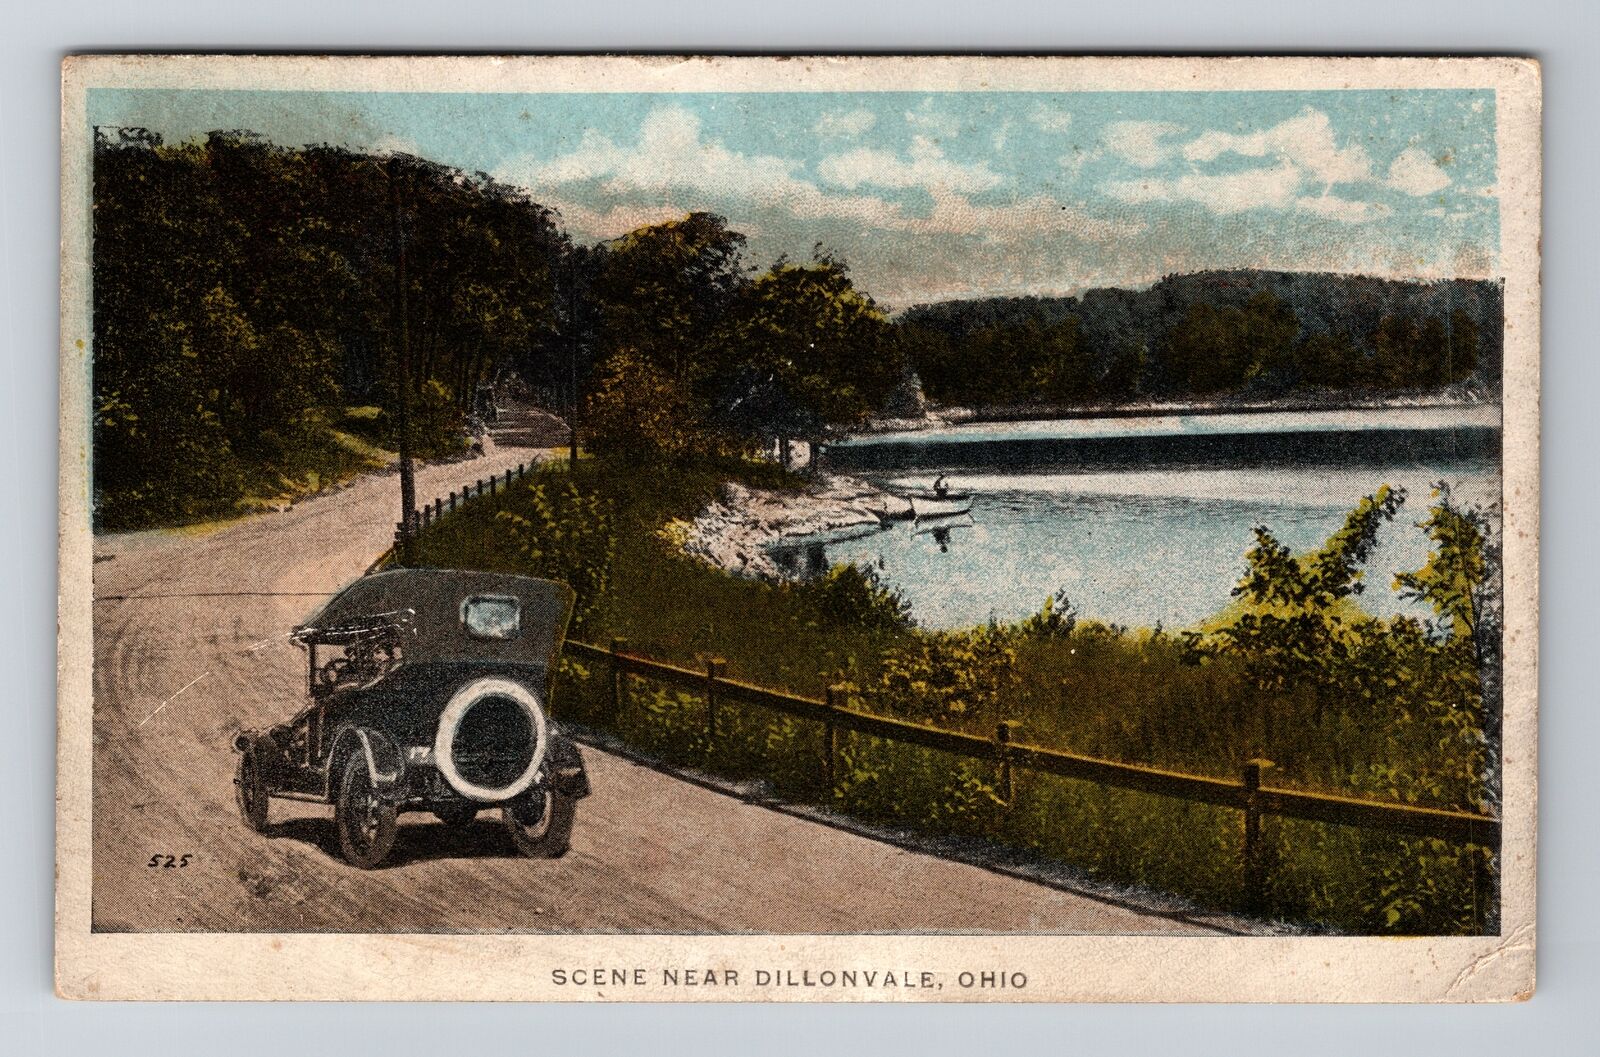 Dillonvale OH-Ohio, Scenic, Old Car Driving Next to Lake, Vintage Postcard